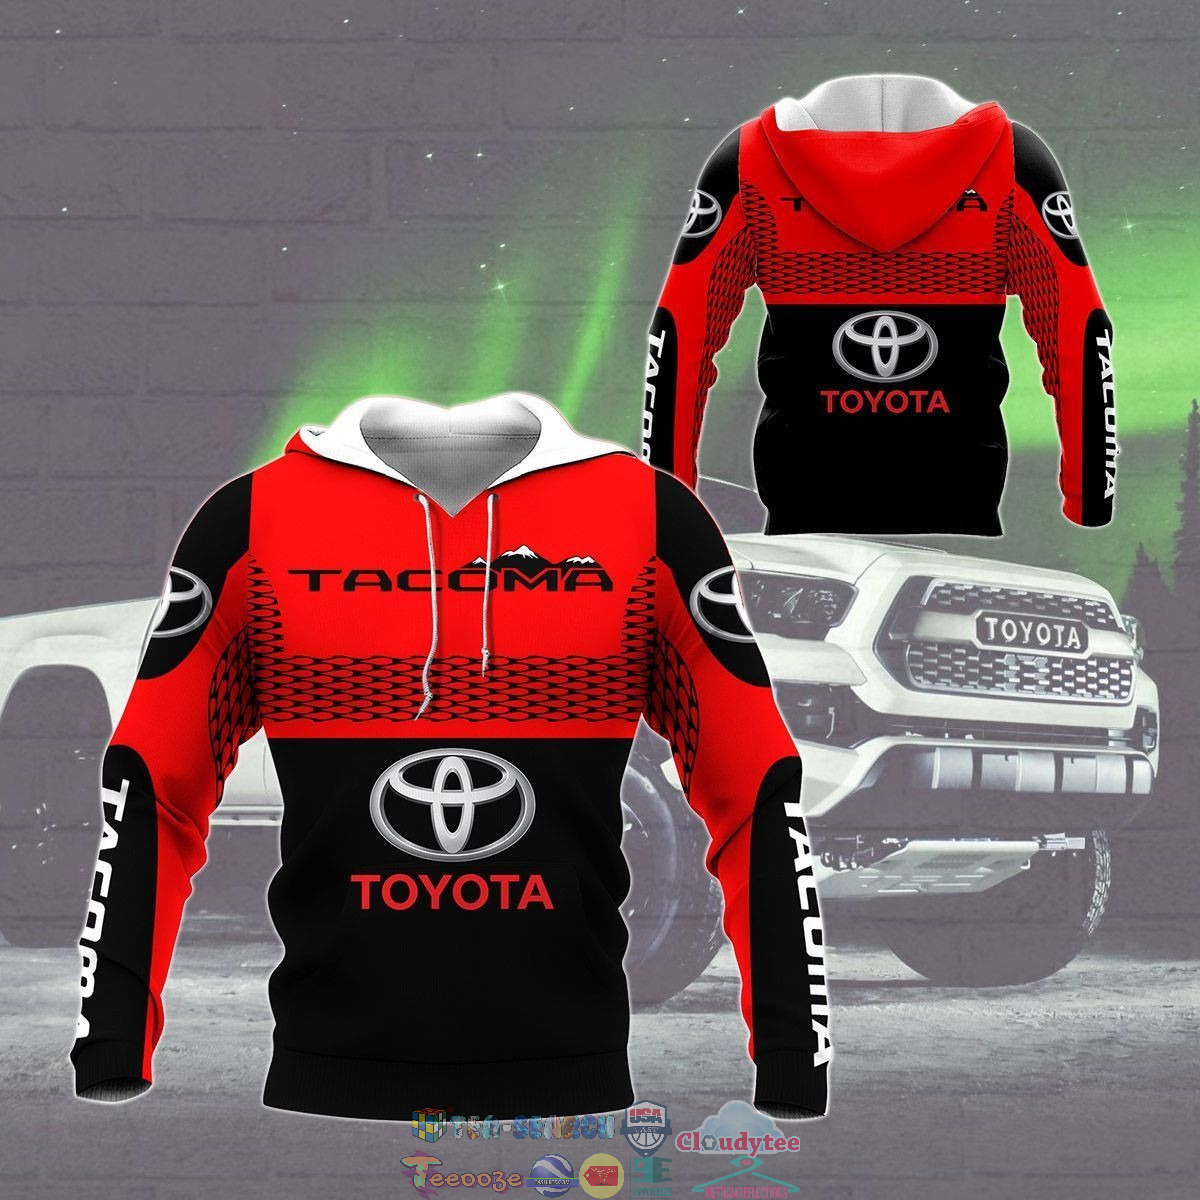 Toyota Tacoma ver 14 3D hoodie and t-shirt